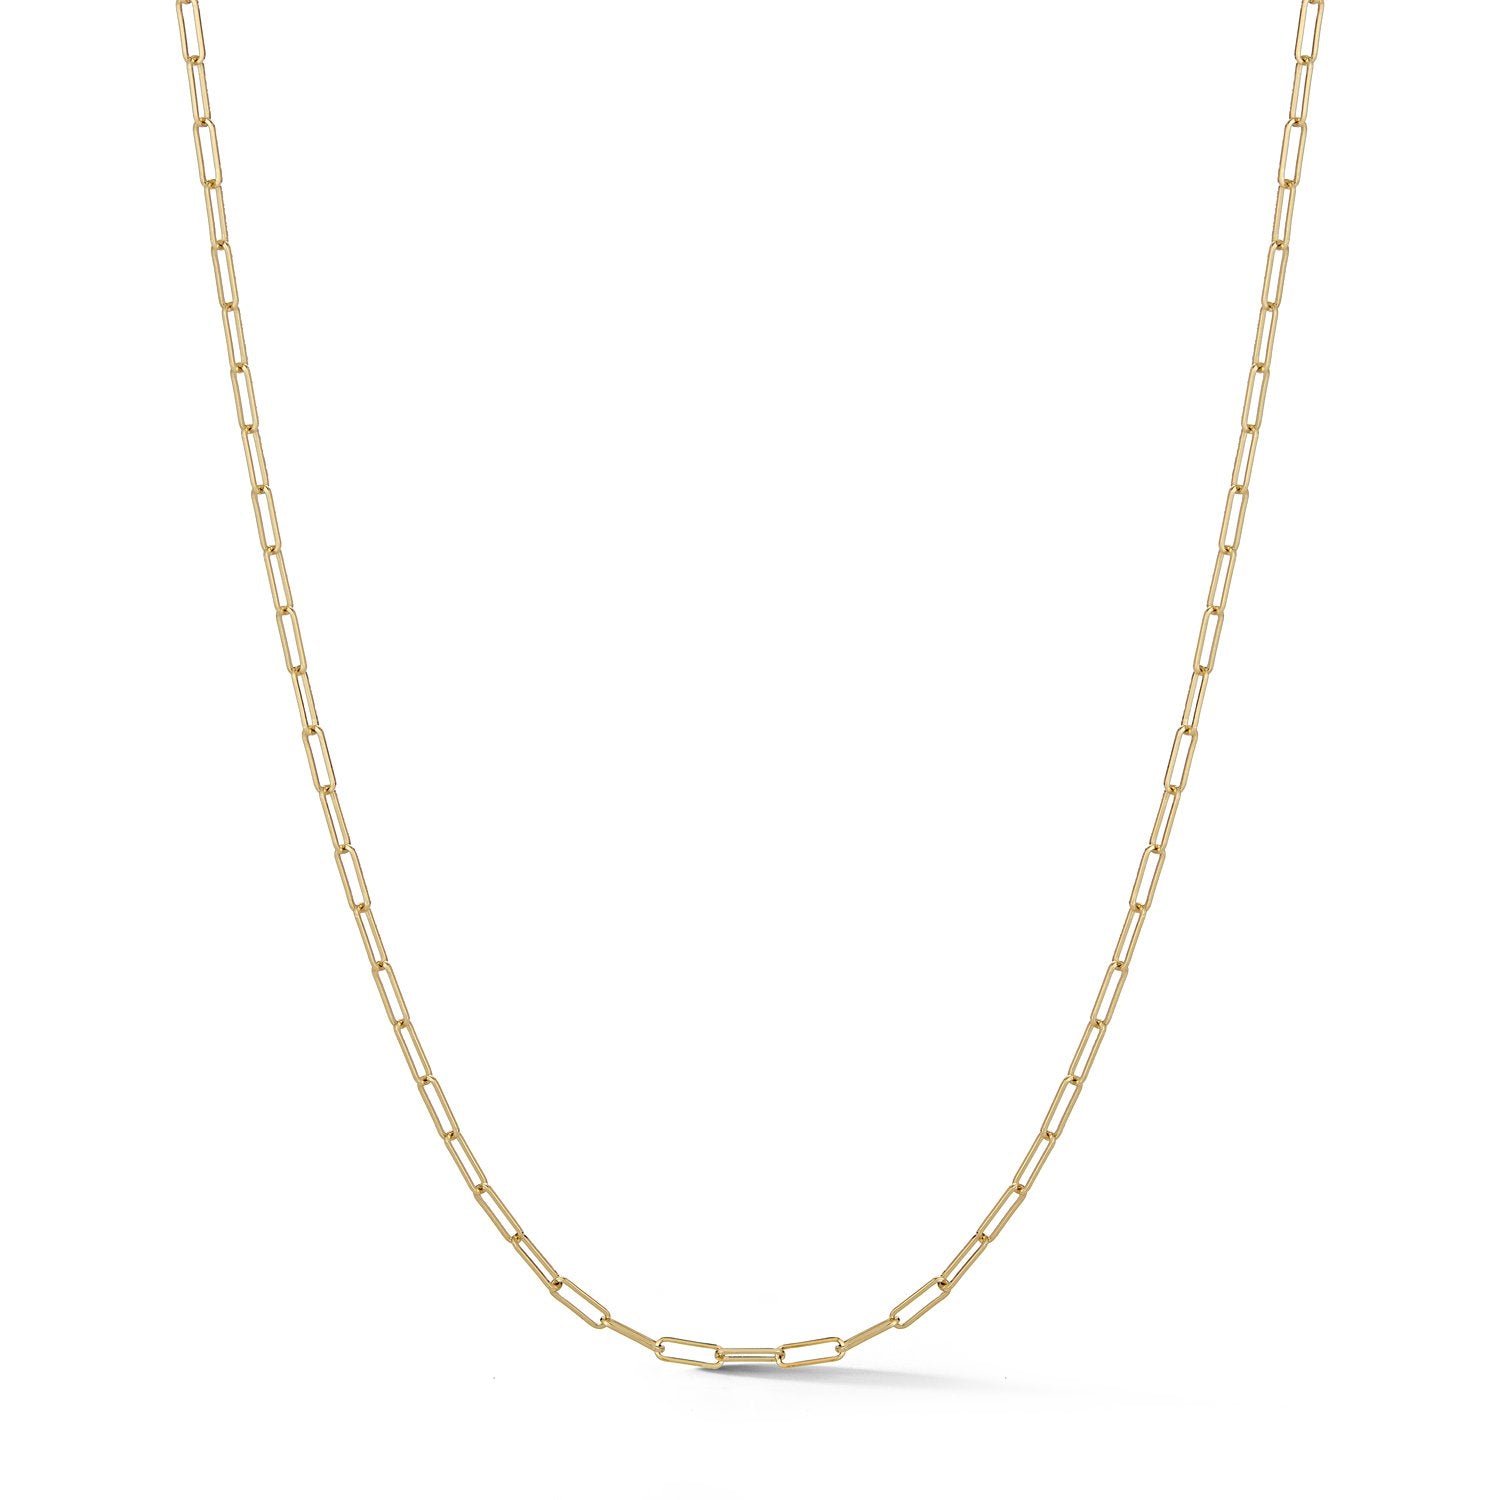 Tatum Small Rectangle Chain Necklace in 18K Yellow Gold